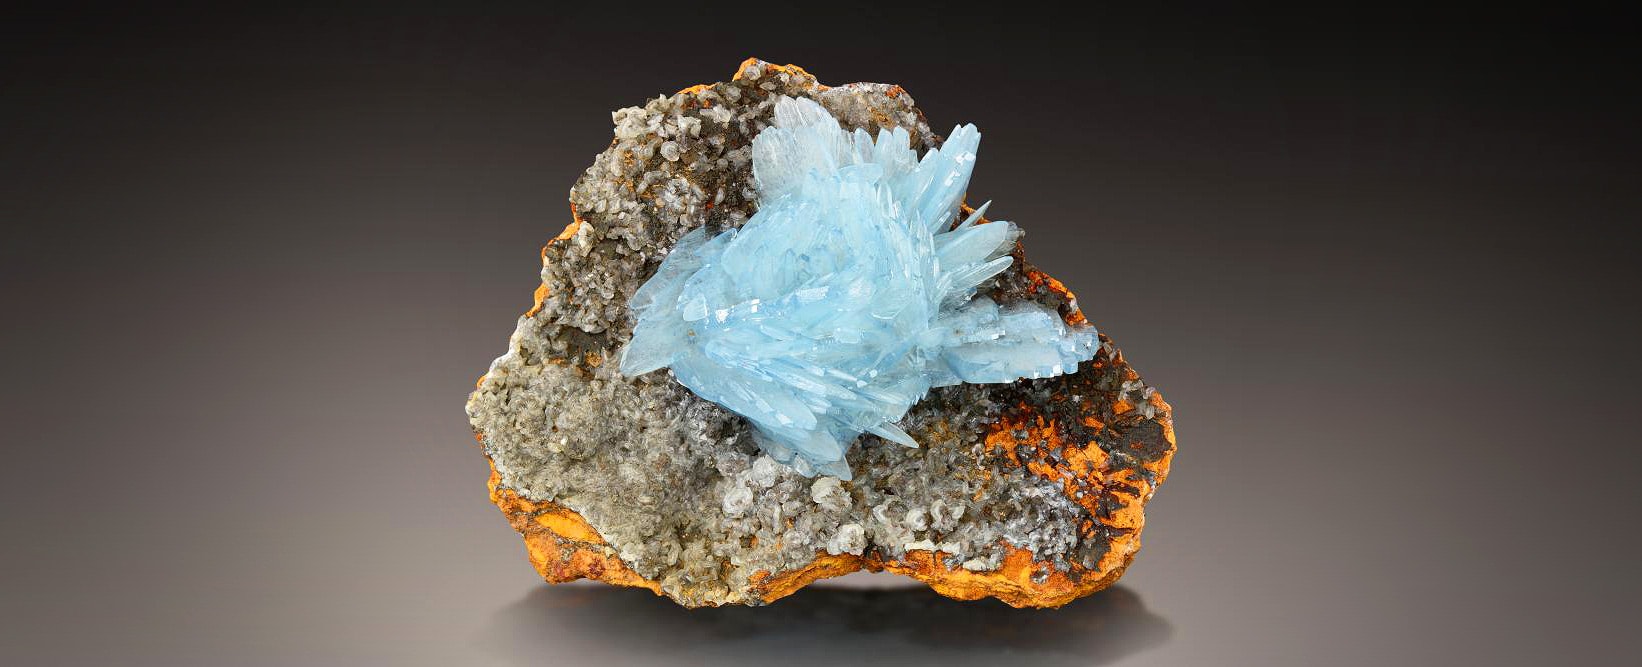 Barite Meaning and Properties 2